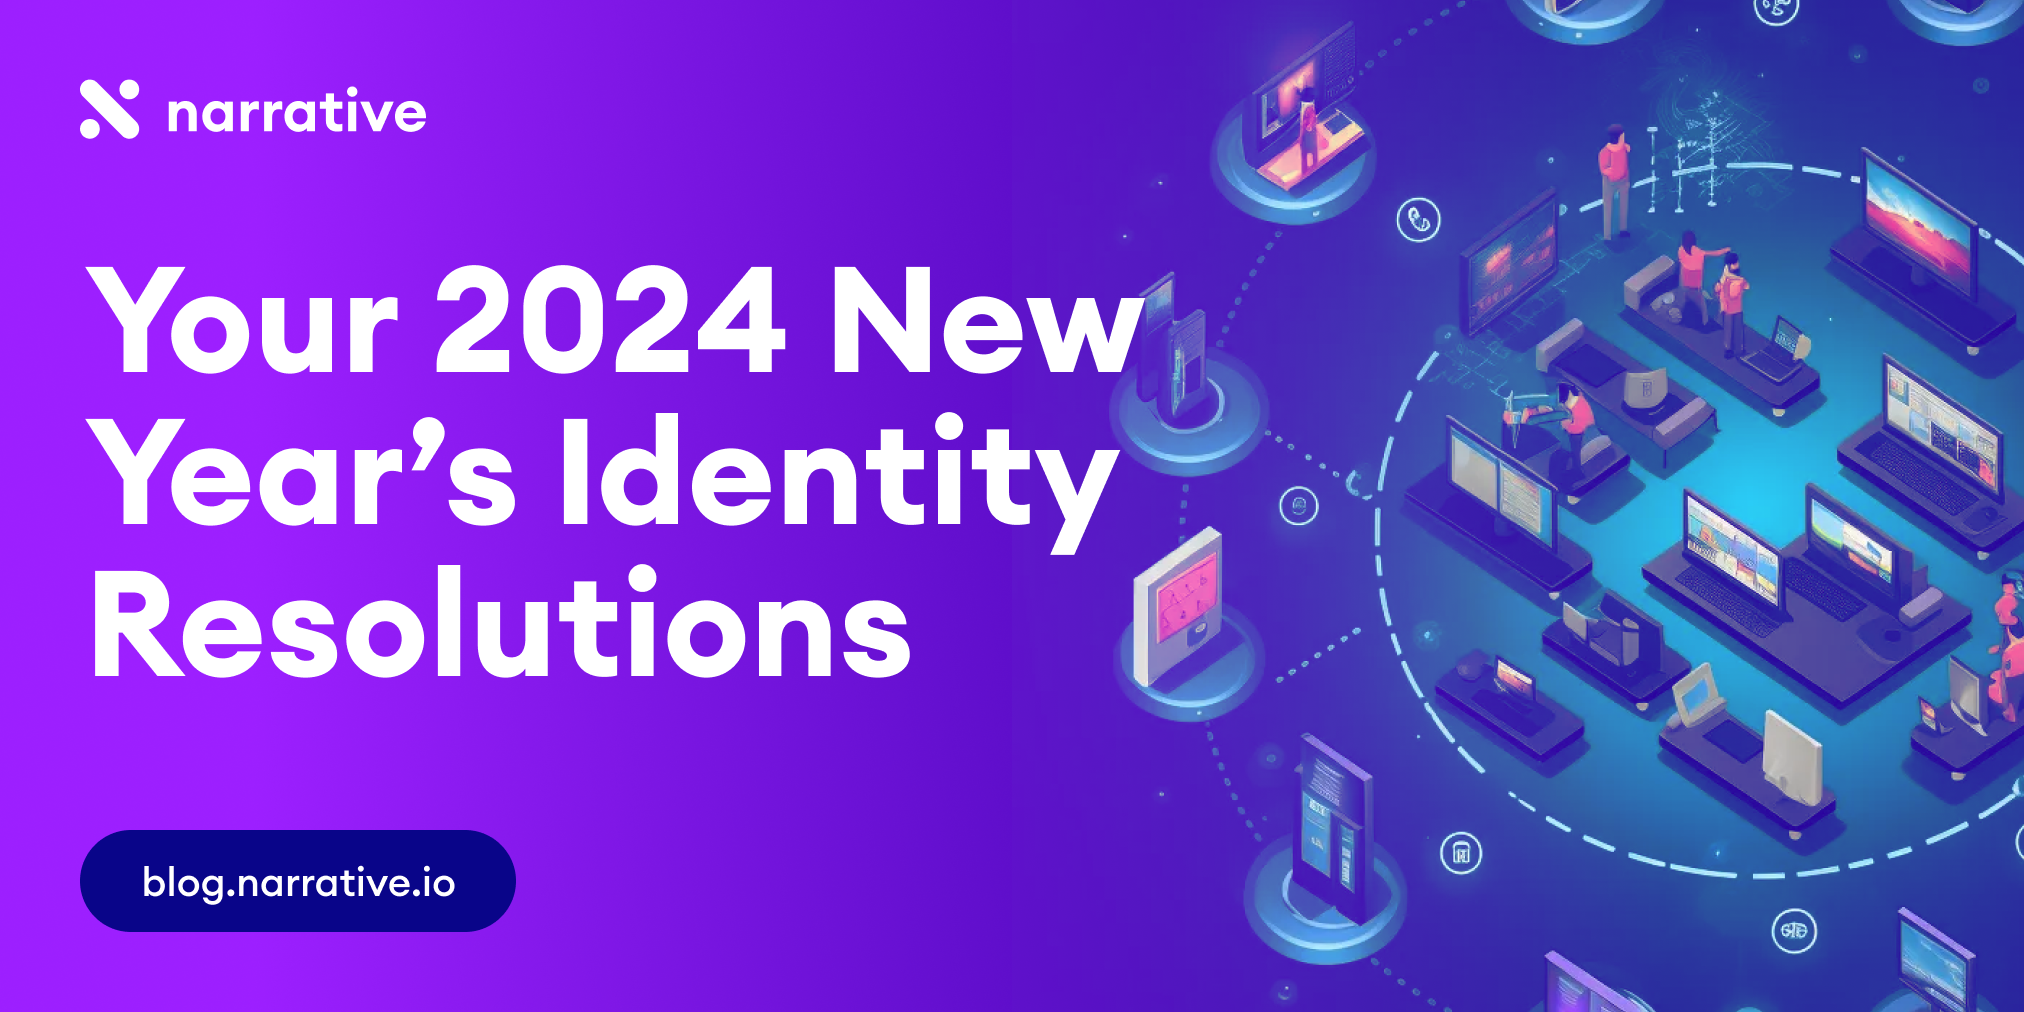 Your 2024 New Year’s Identity Resolutions